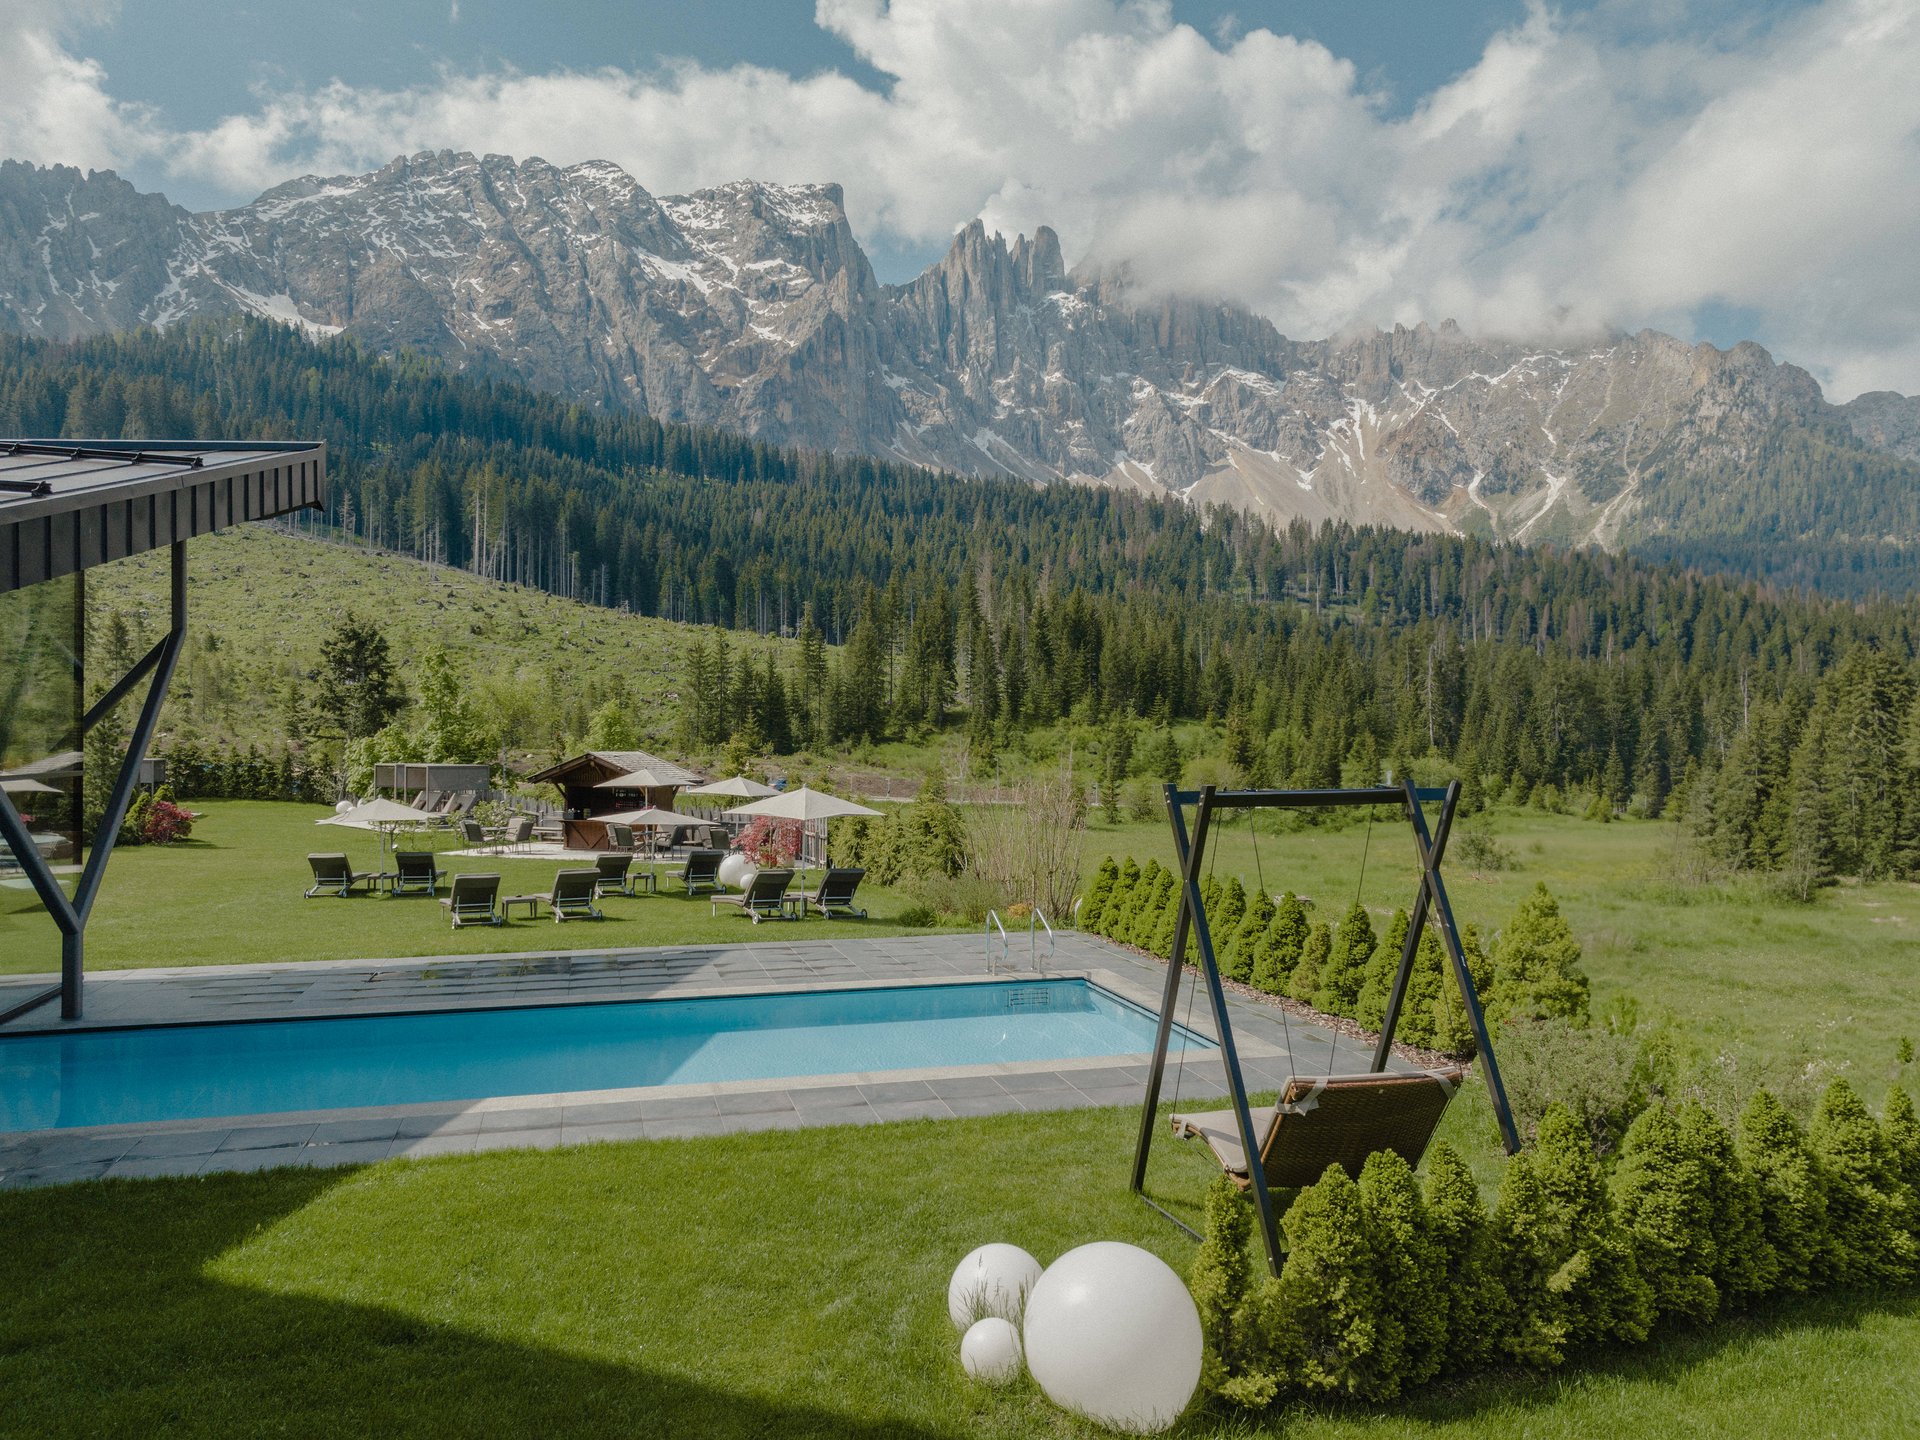 The most beautiful photos from our hotel in the Dolomites